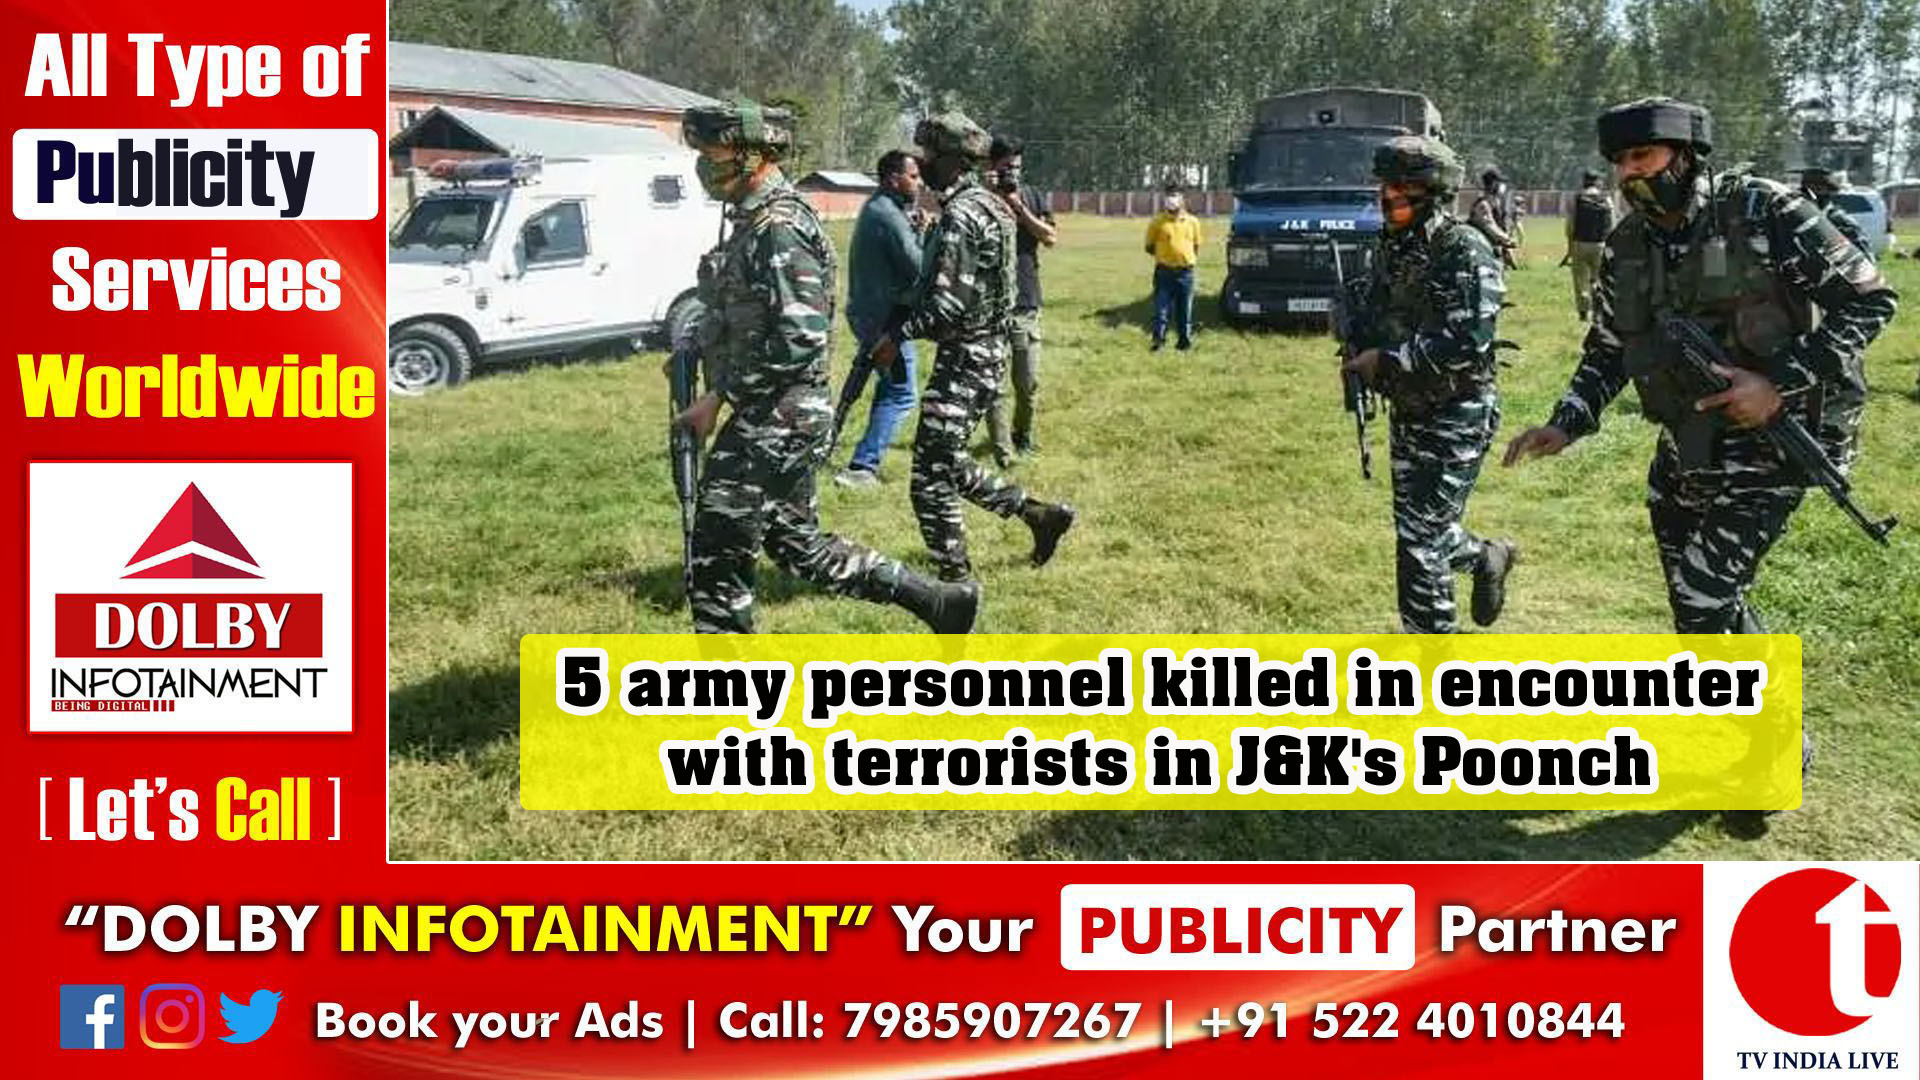 5 army personnel killed in encounter with terrorists in J&K's Poonch